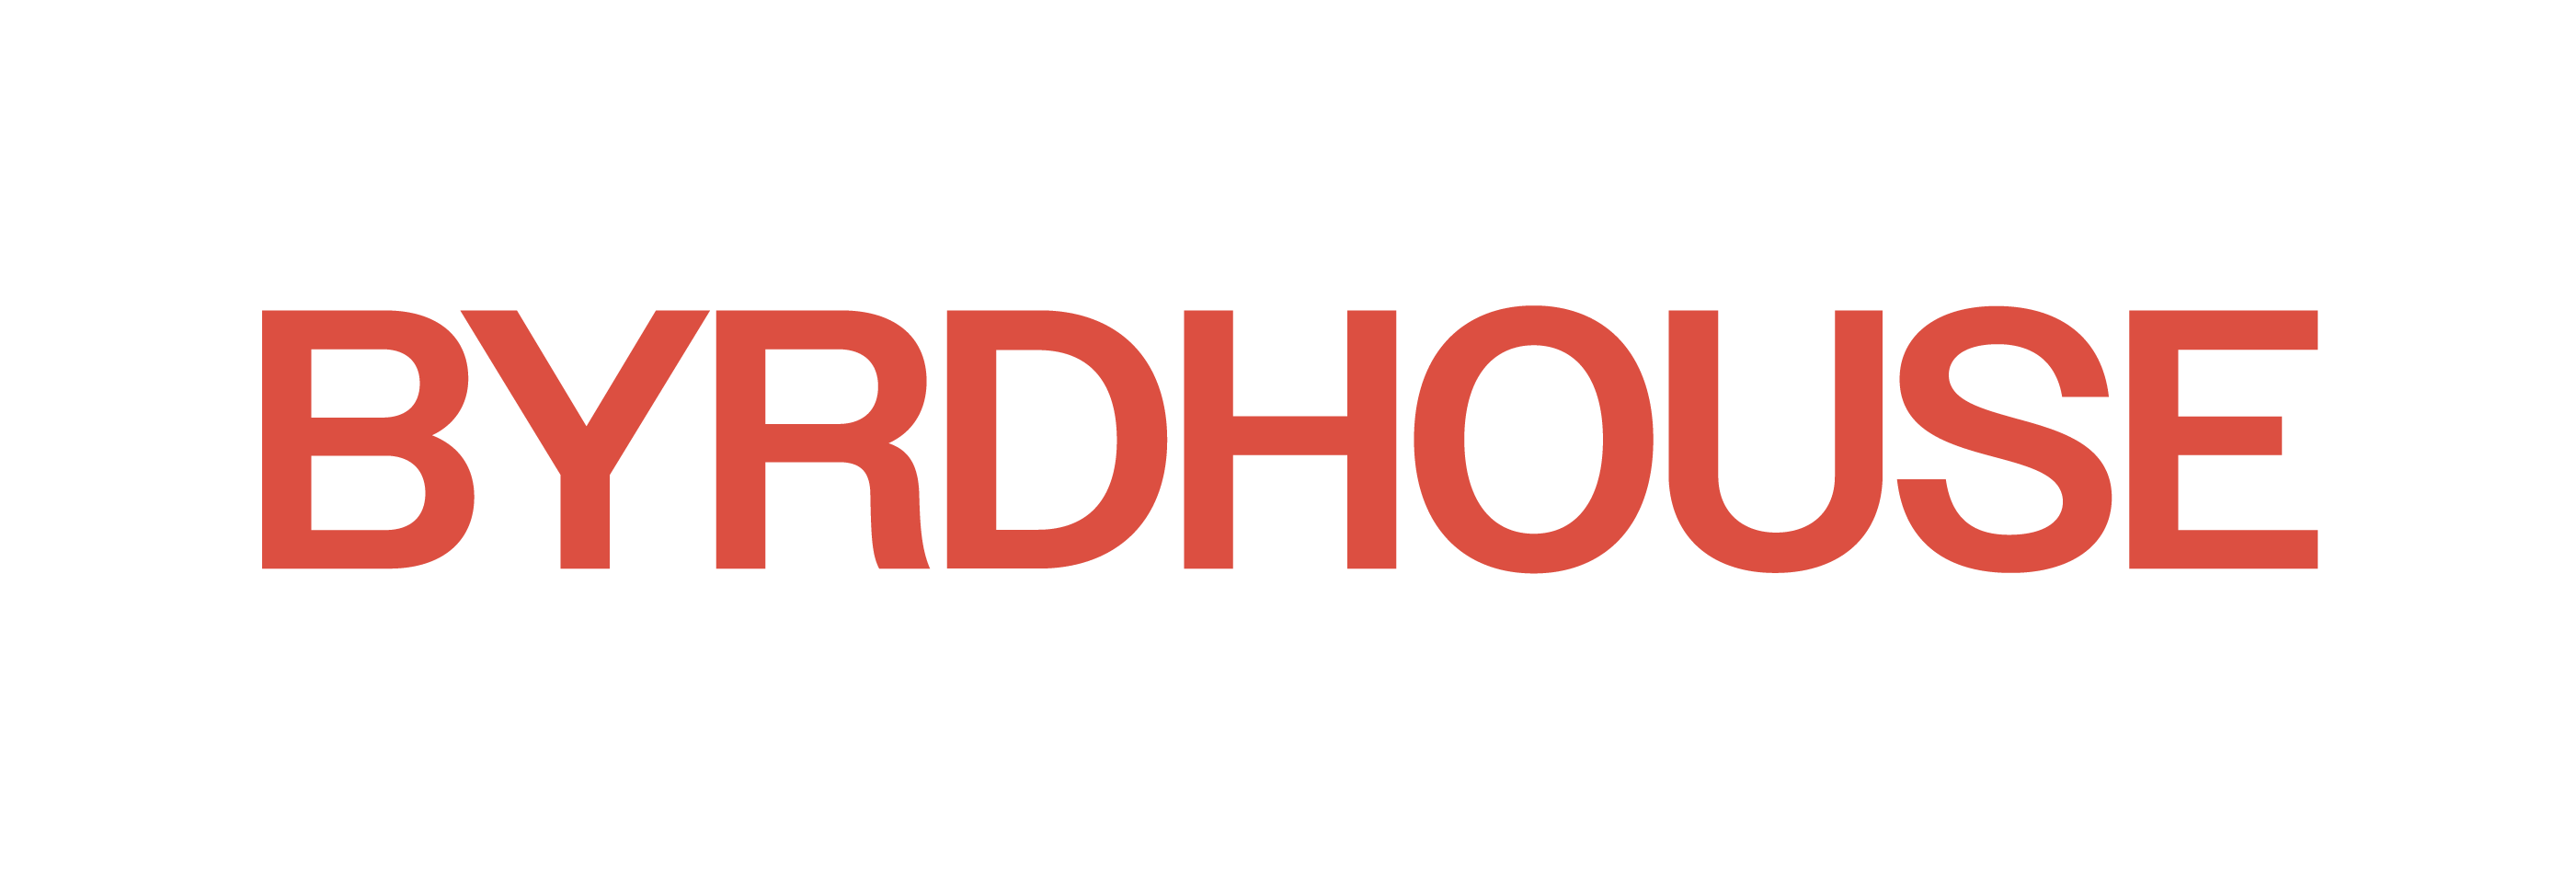 BYRDHOUSE is watching you